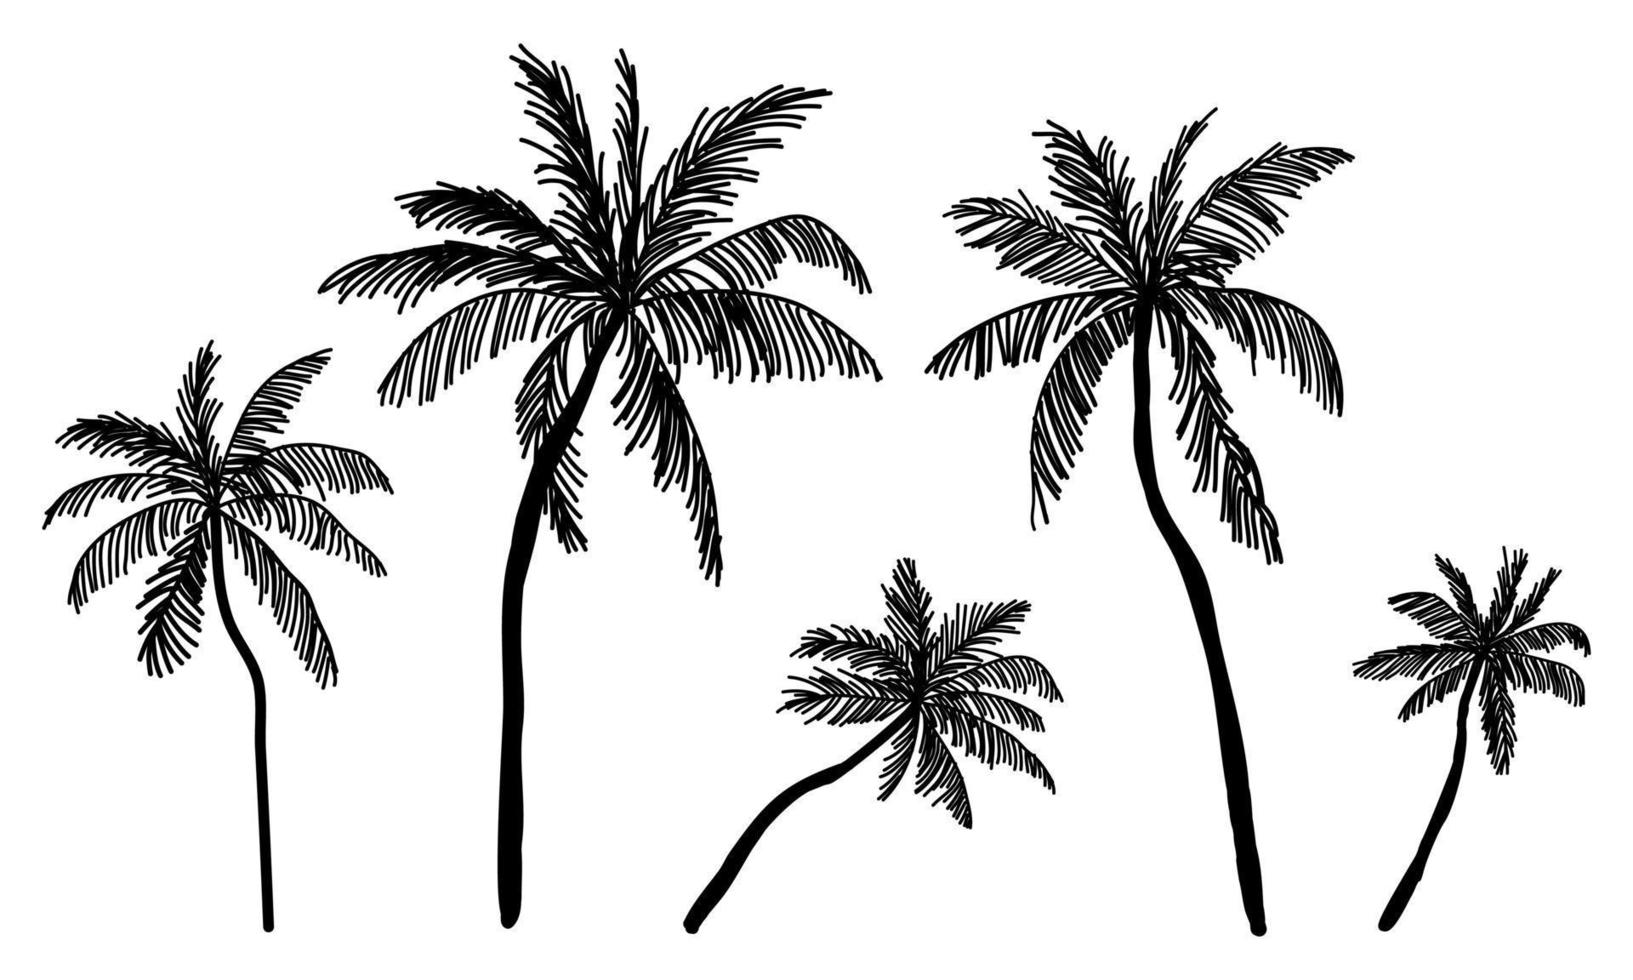 Collection of Black Coconut trees Icon. Can be used to illustrate any nature or healthy lifestyle topic. vector